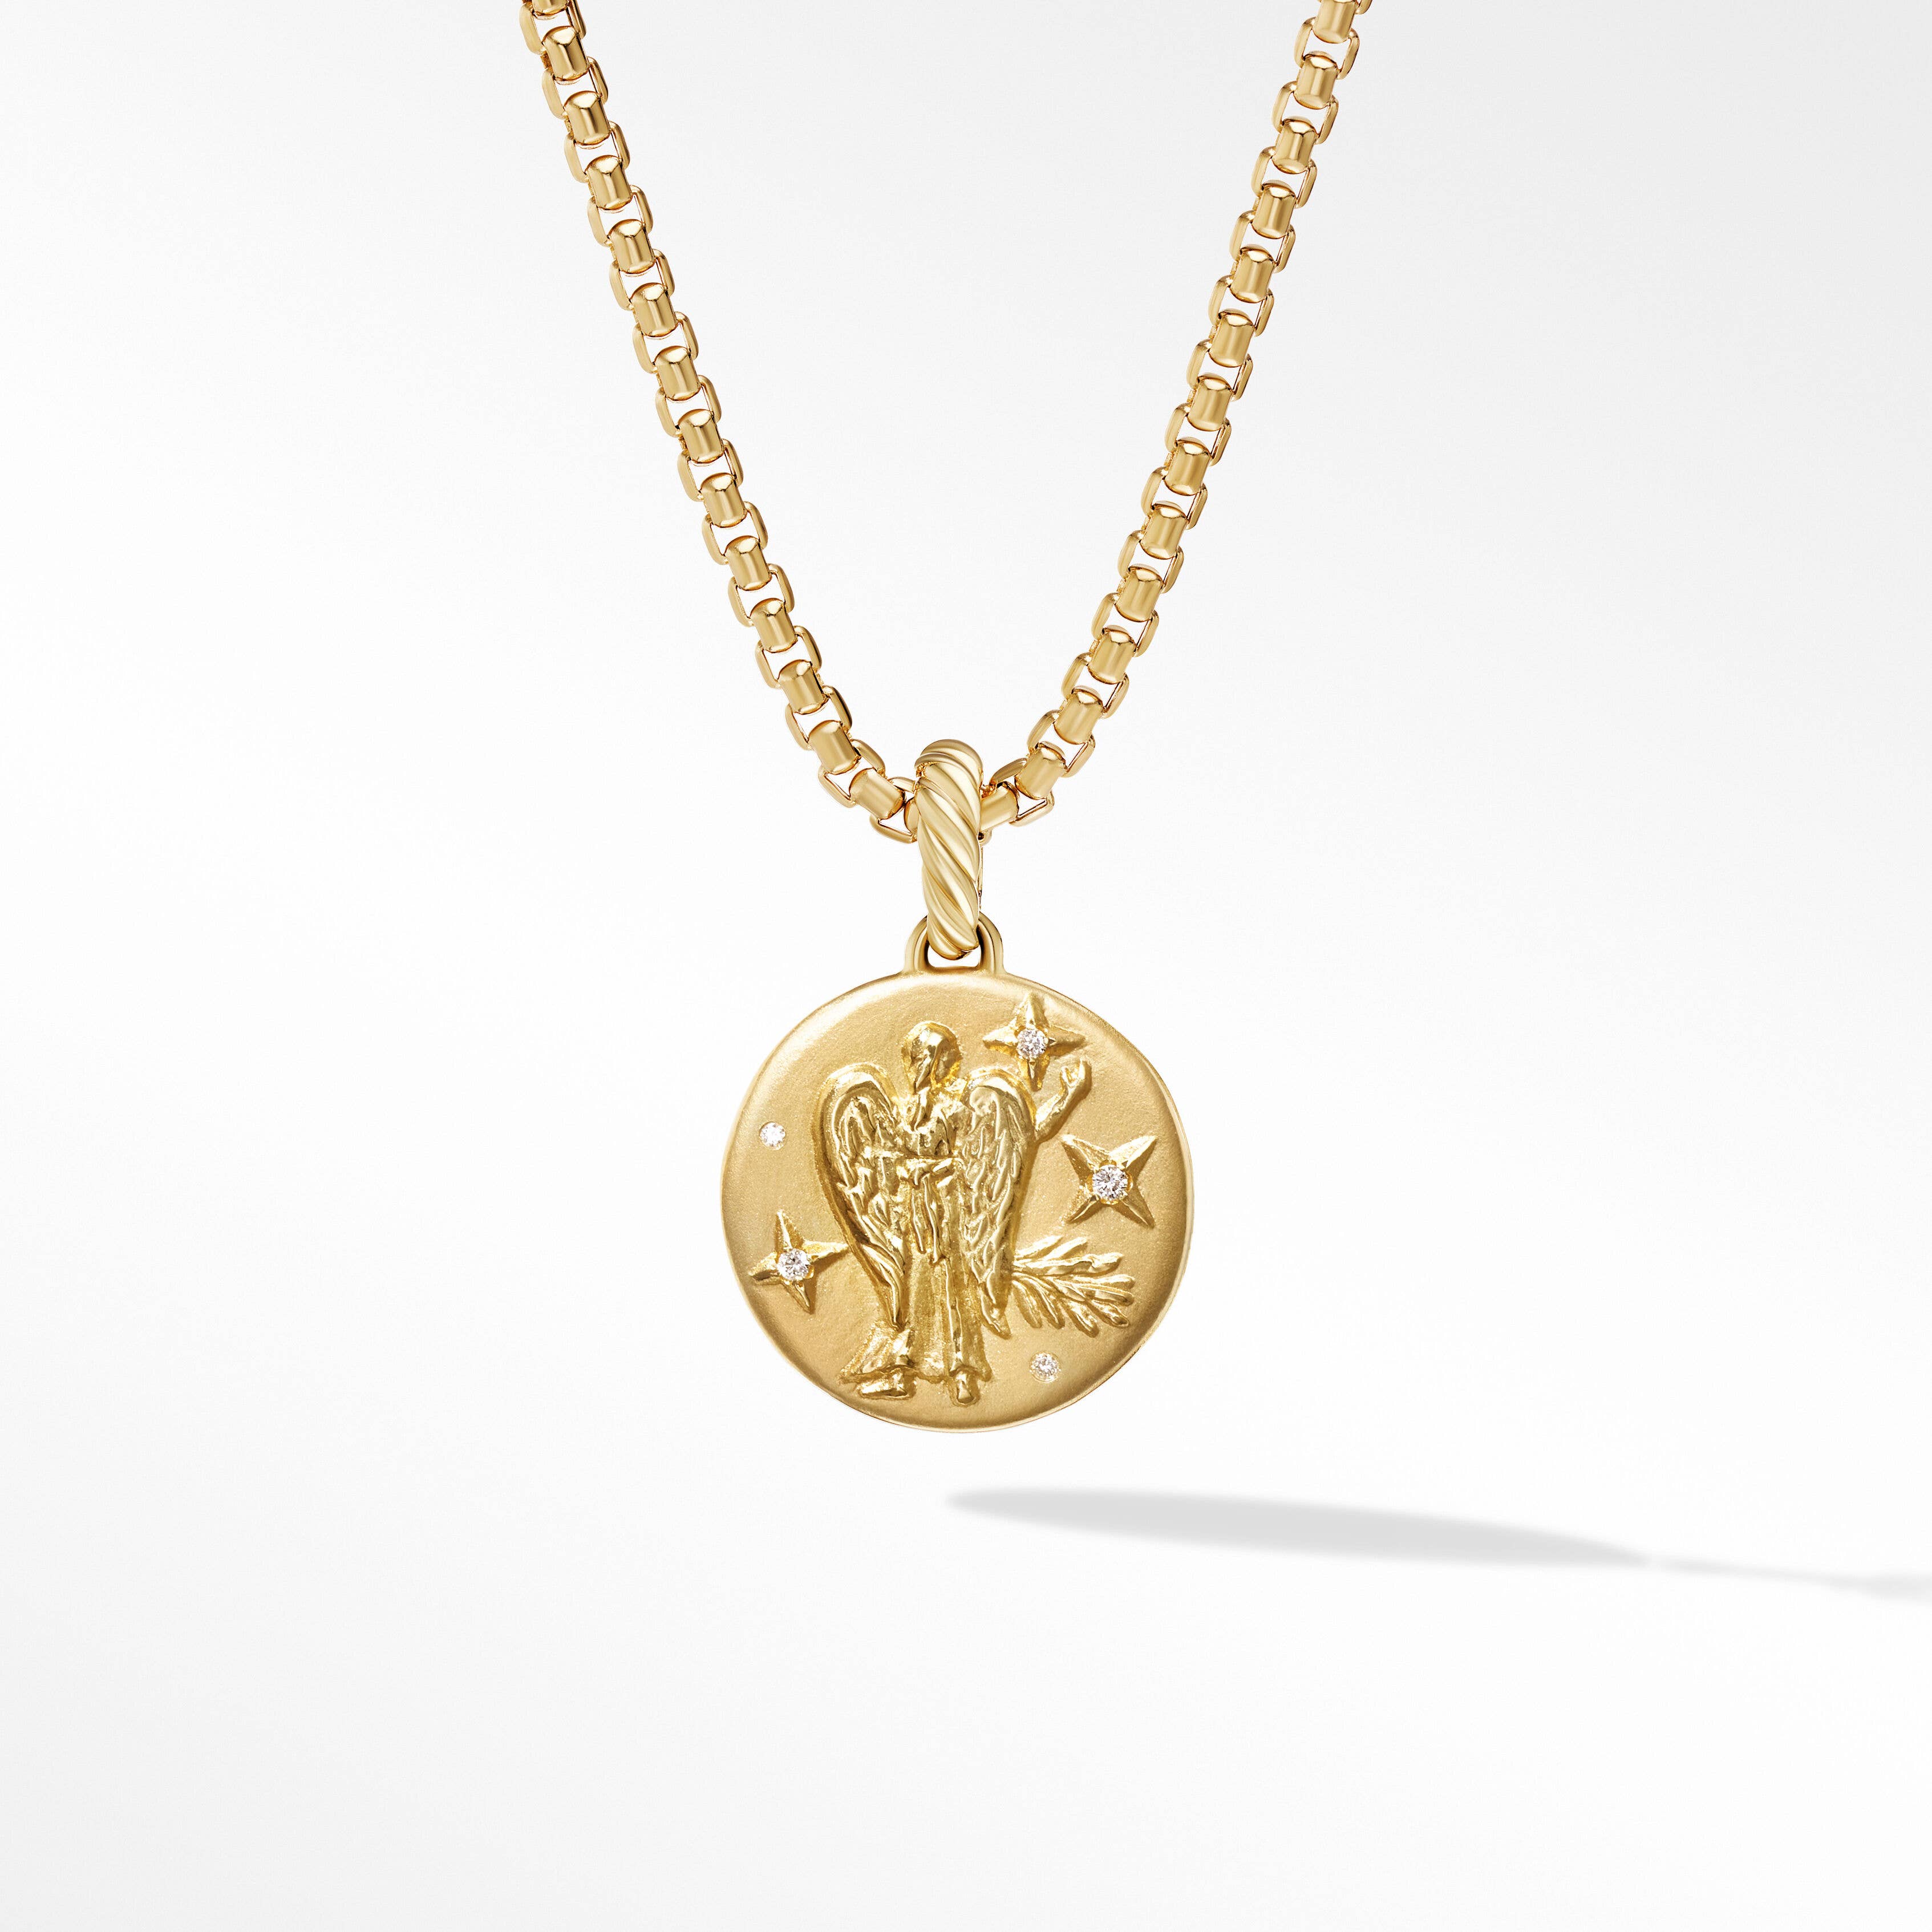 Virgo Amulet in 18K Yellow Gold with Diamonds